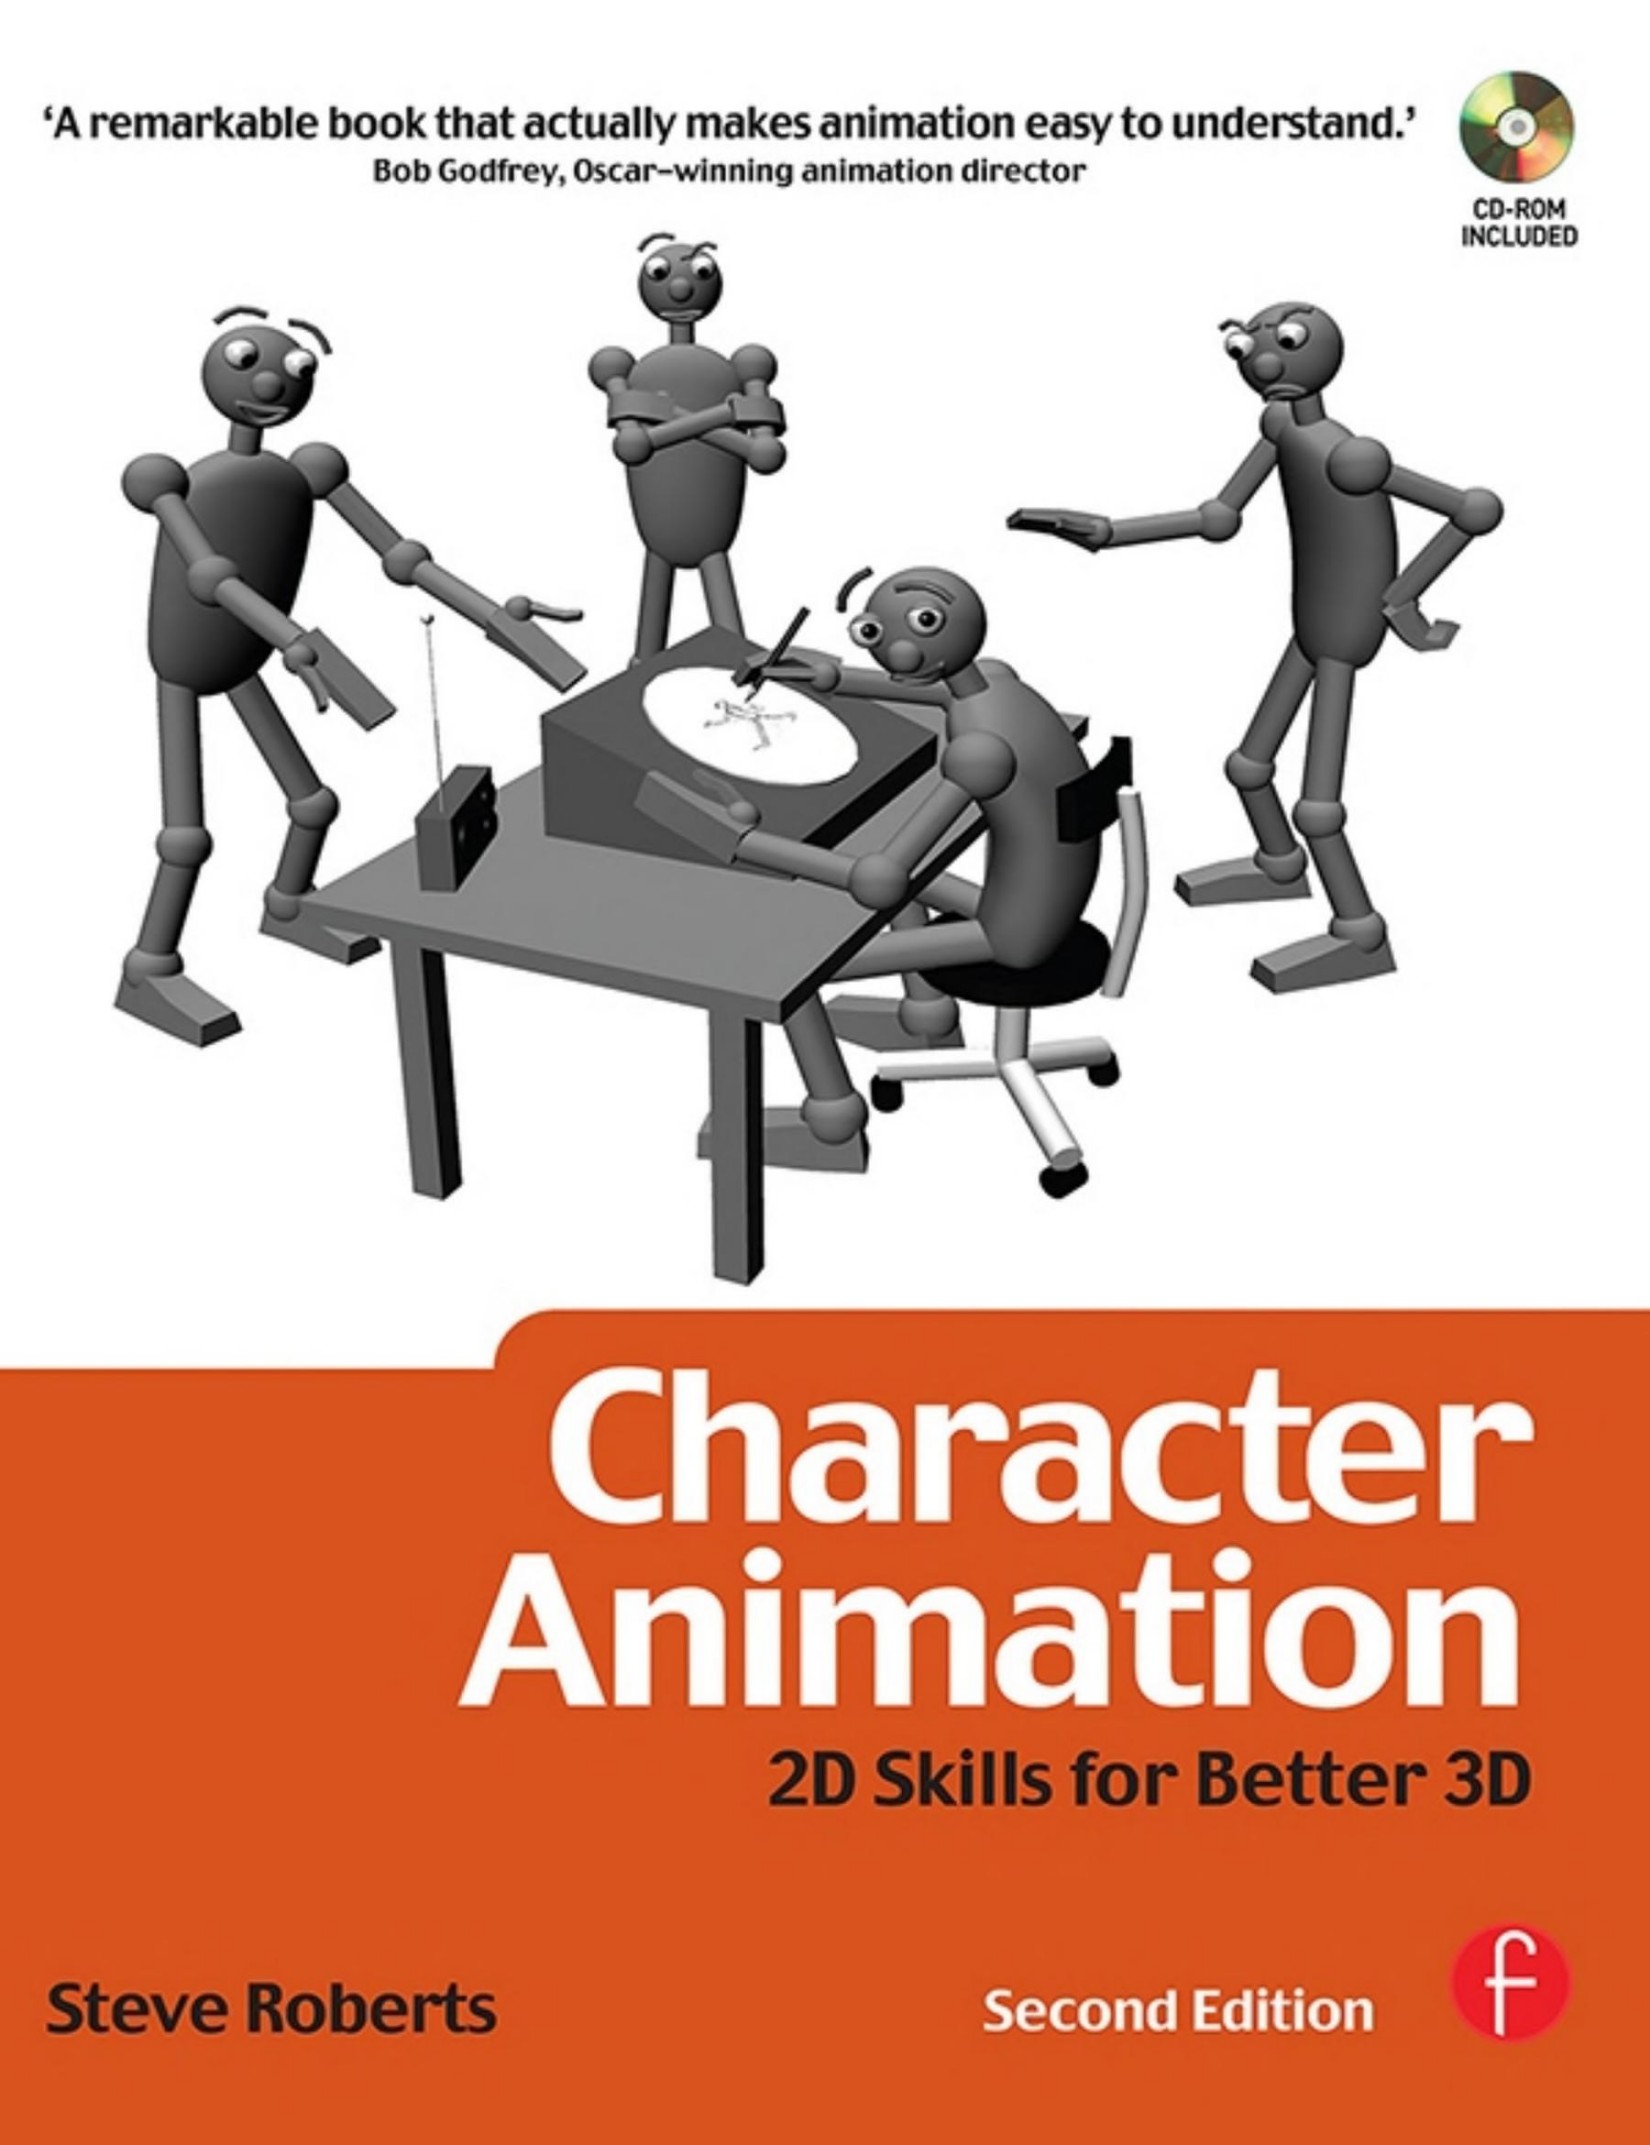 Character Animation: 2D Skills for Better 3D